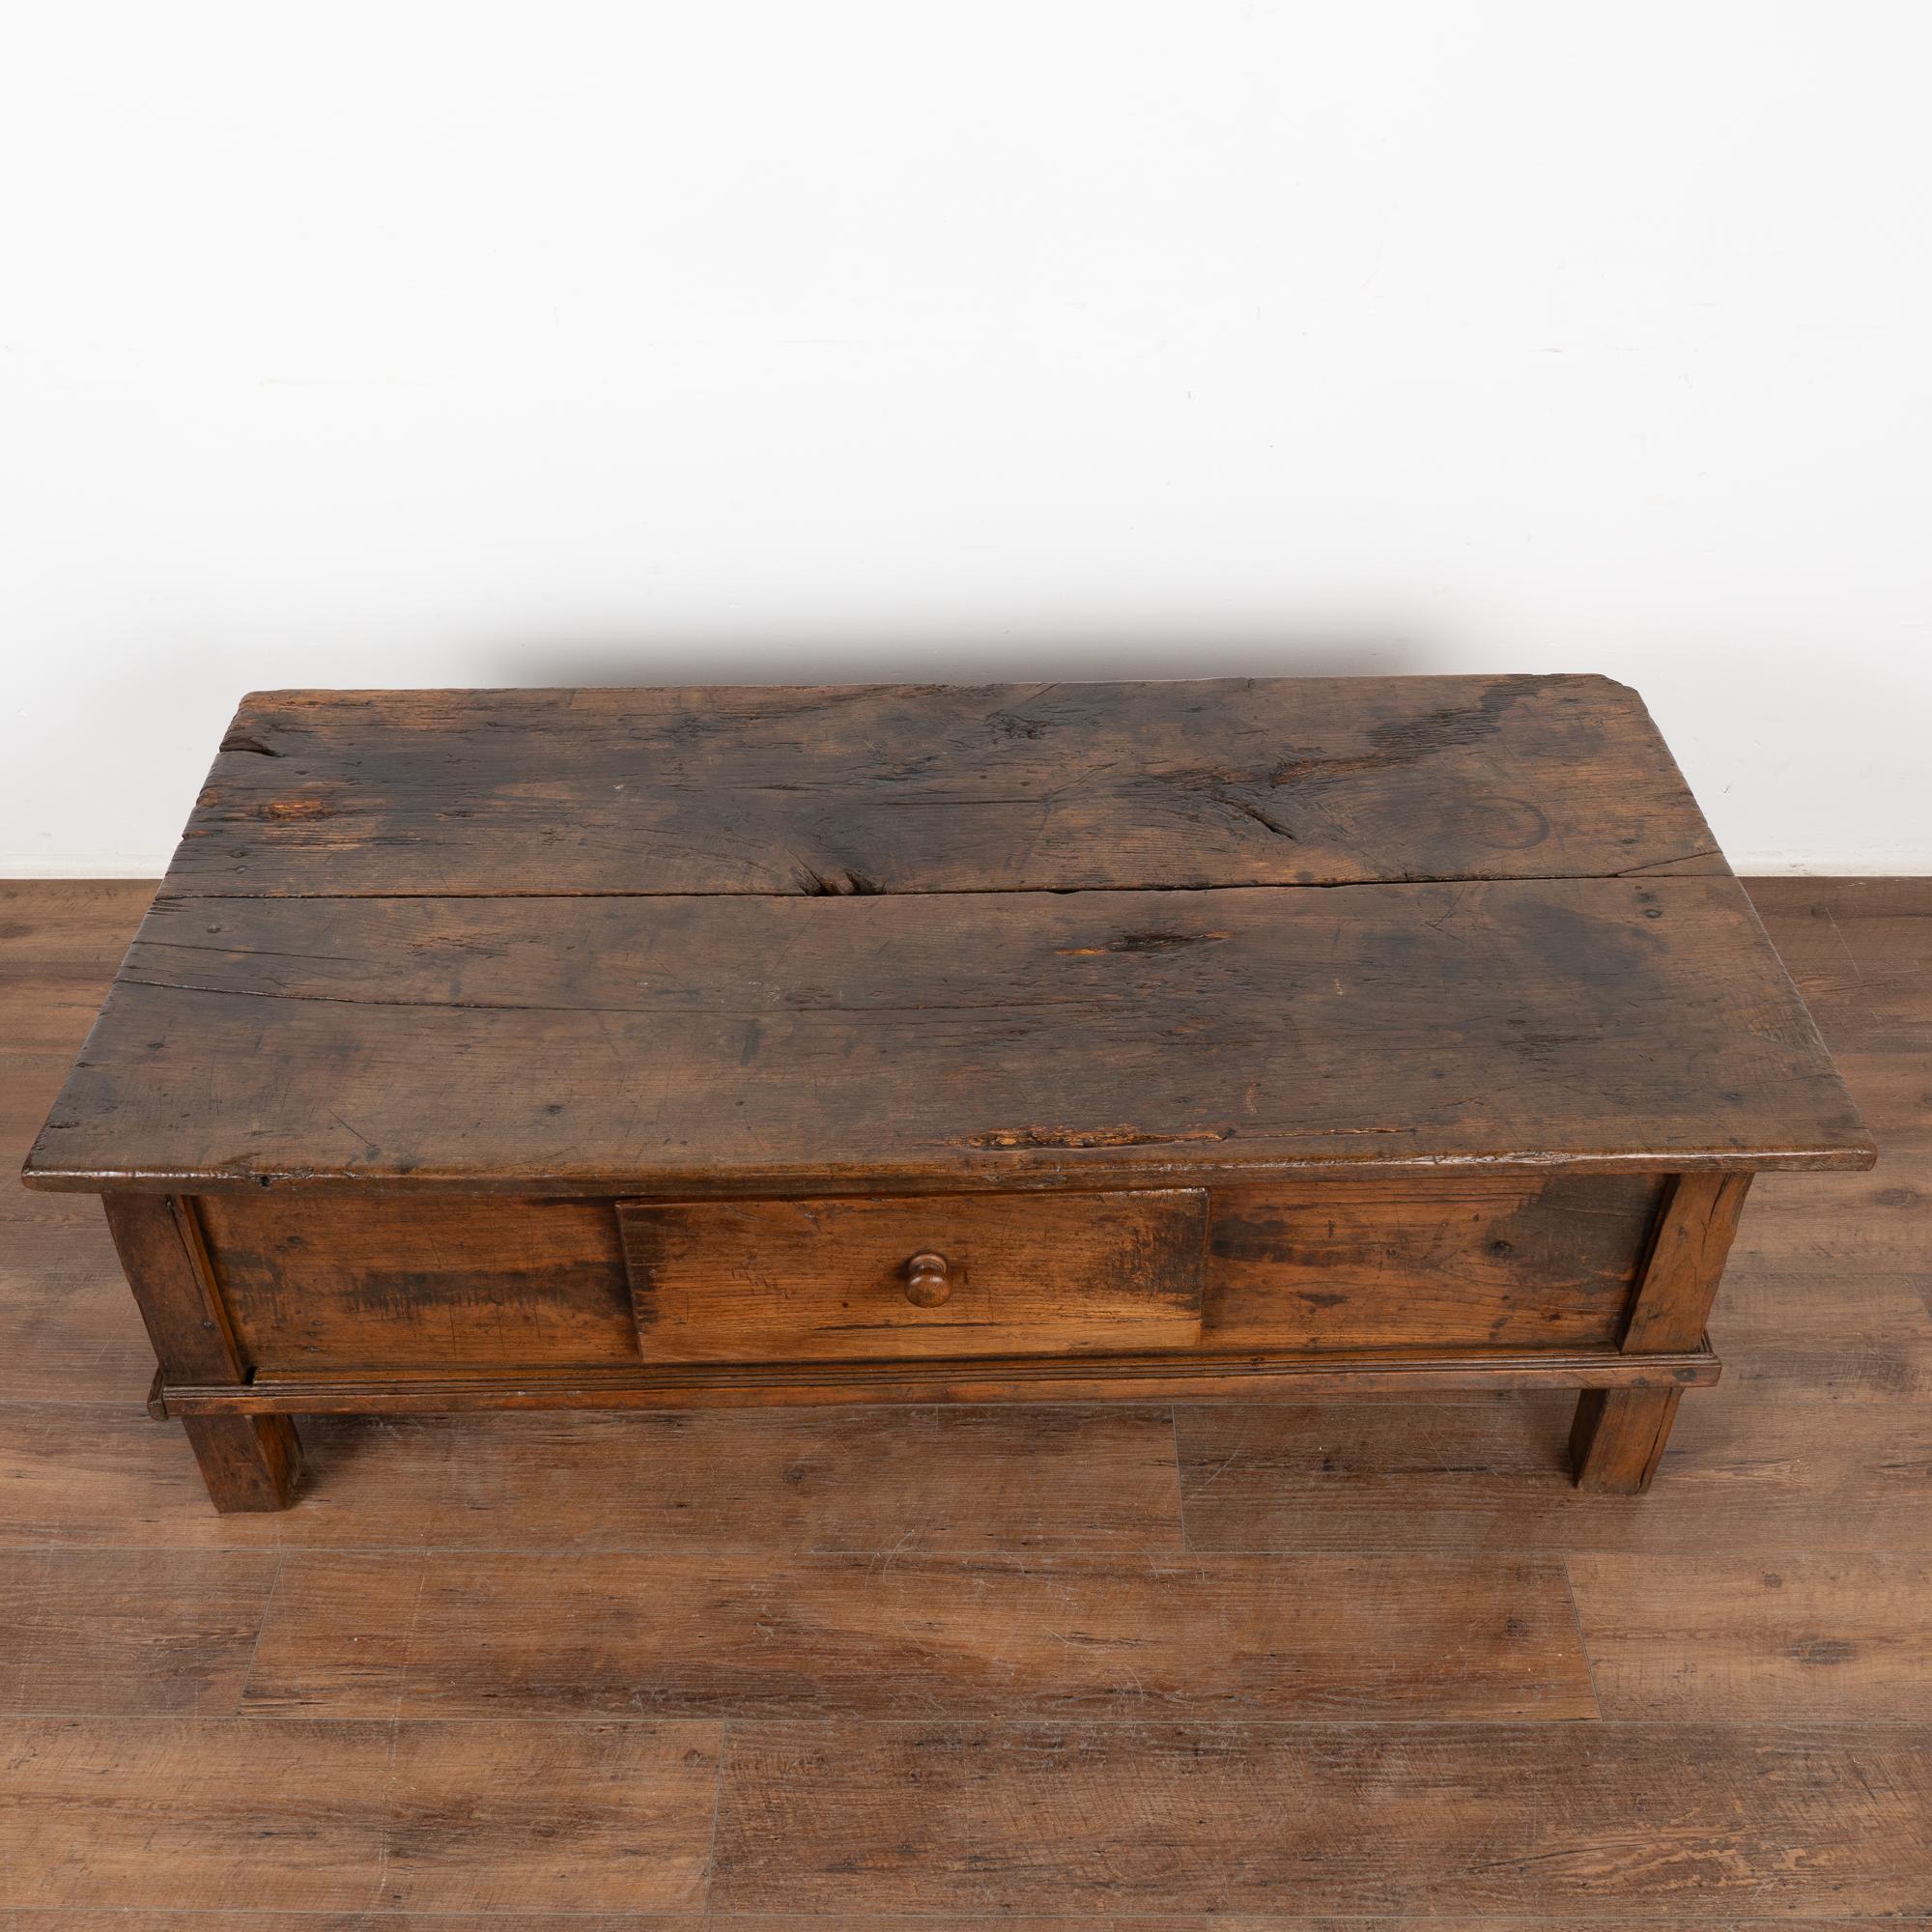 Chestnut French Country Coffee Table with One Drawer, circa 1820-40